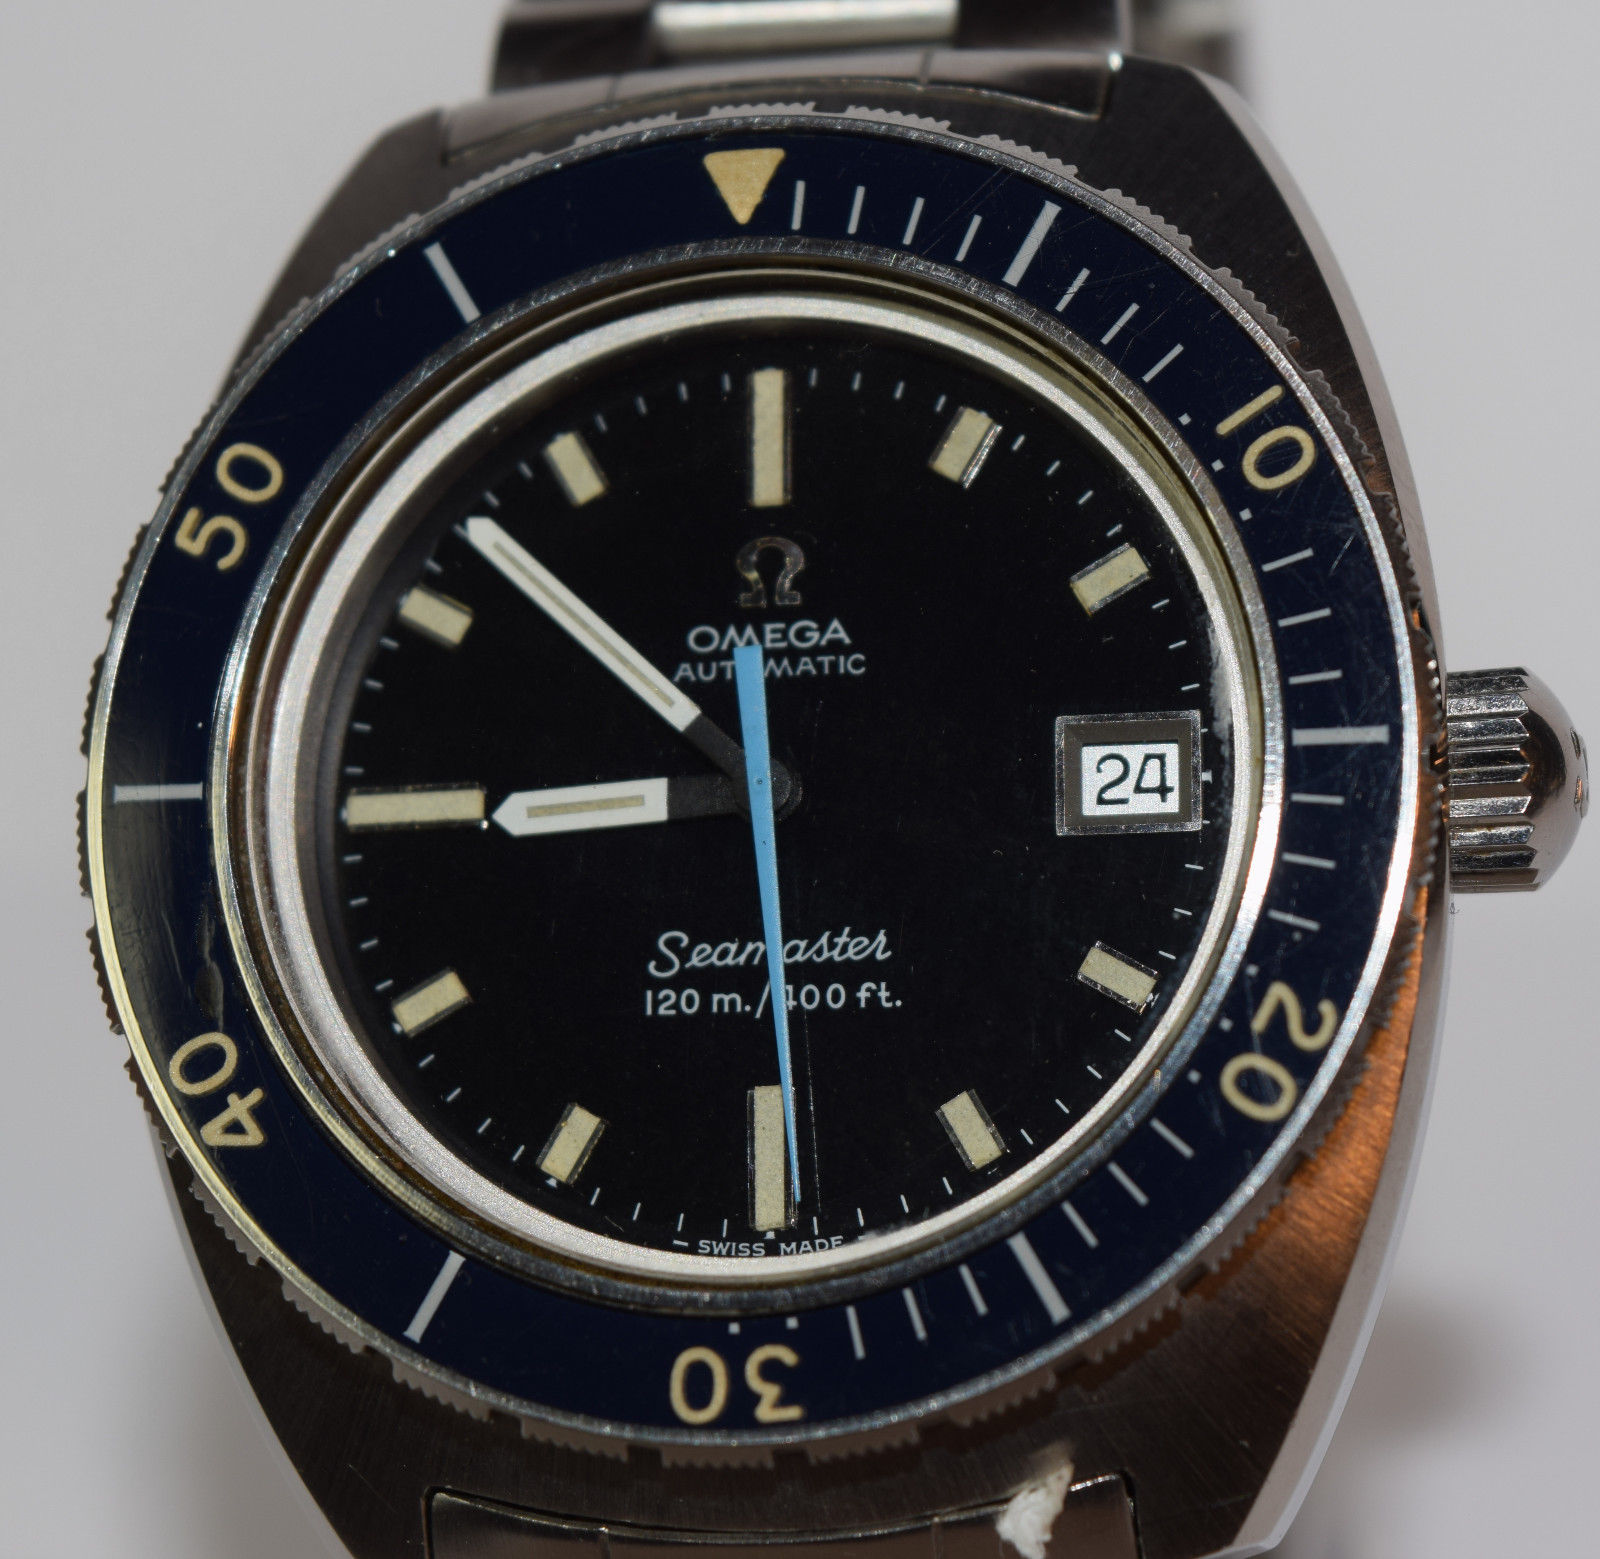 Rare Omega 120m Gent's Diver's Wristwatch - Image 4 of 10